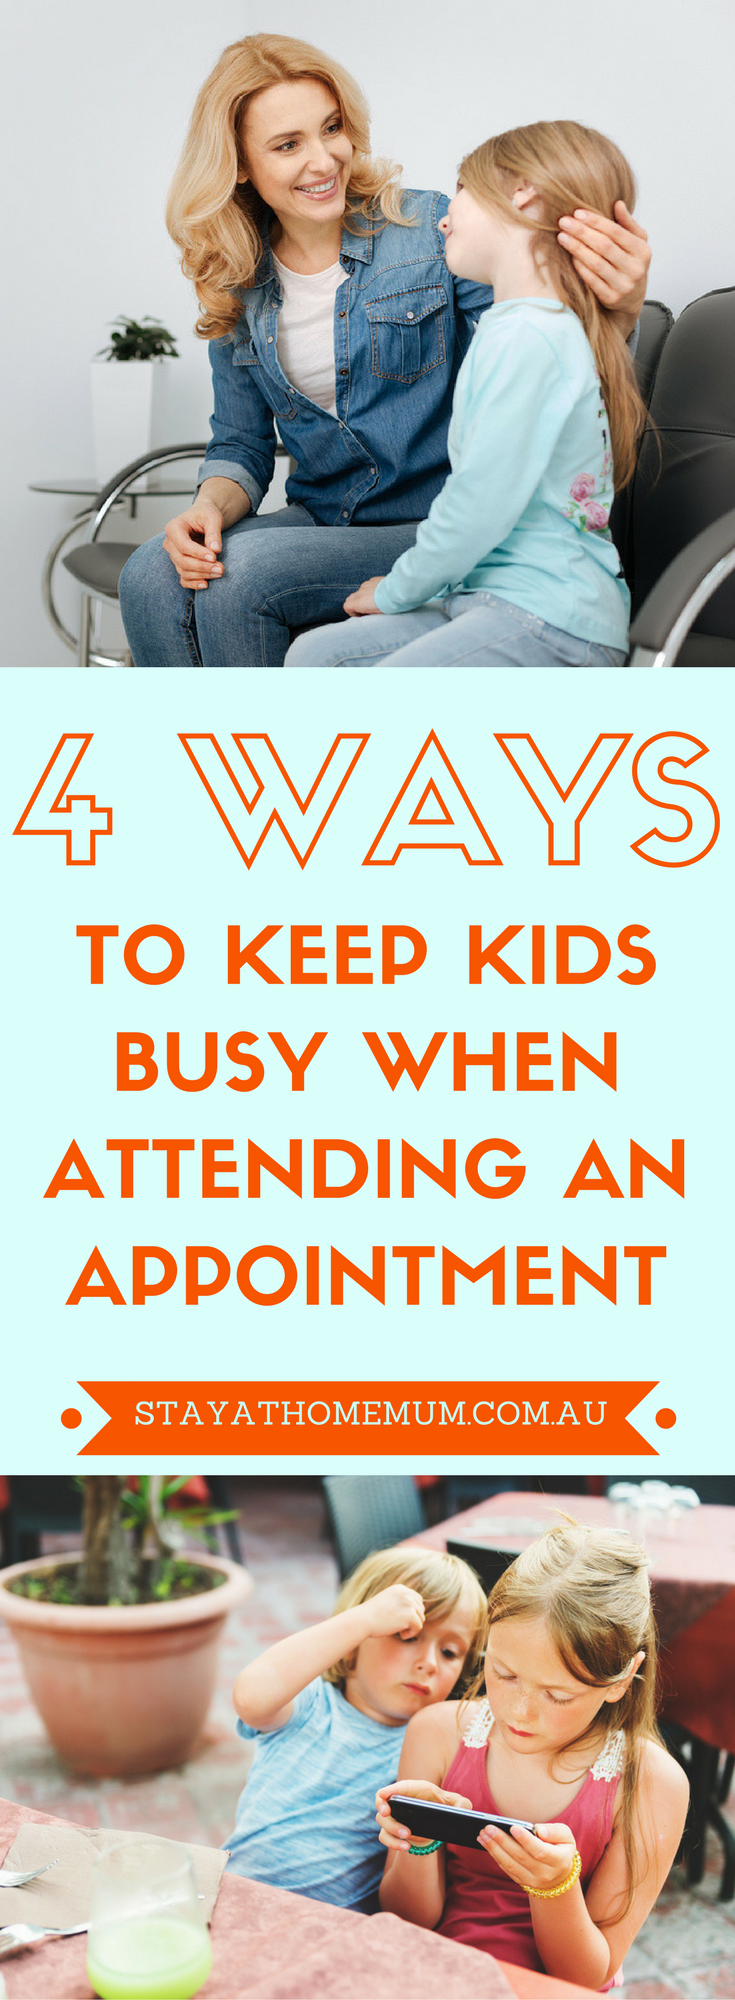 4 Ways to Keep Kids Busy When Attending an Appointment | Stay At Home Mum